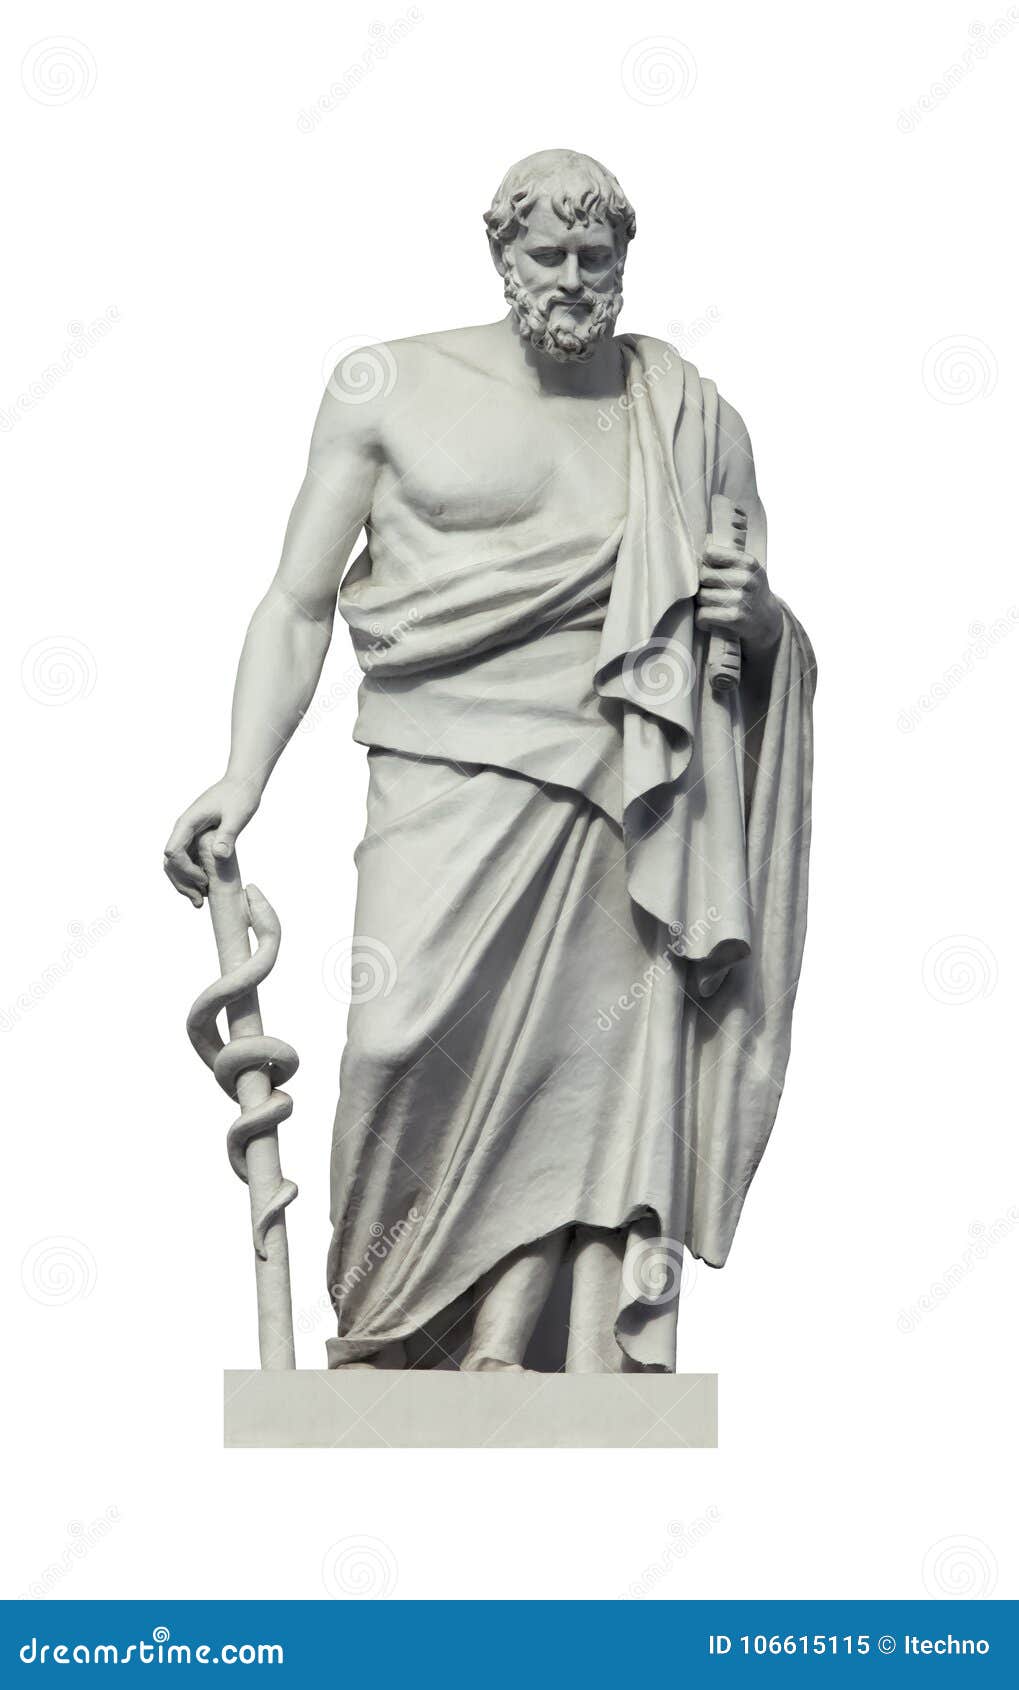 statue of the ancient greek phisician hippocrates